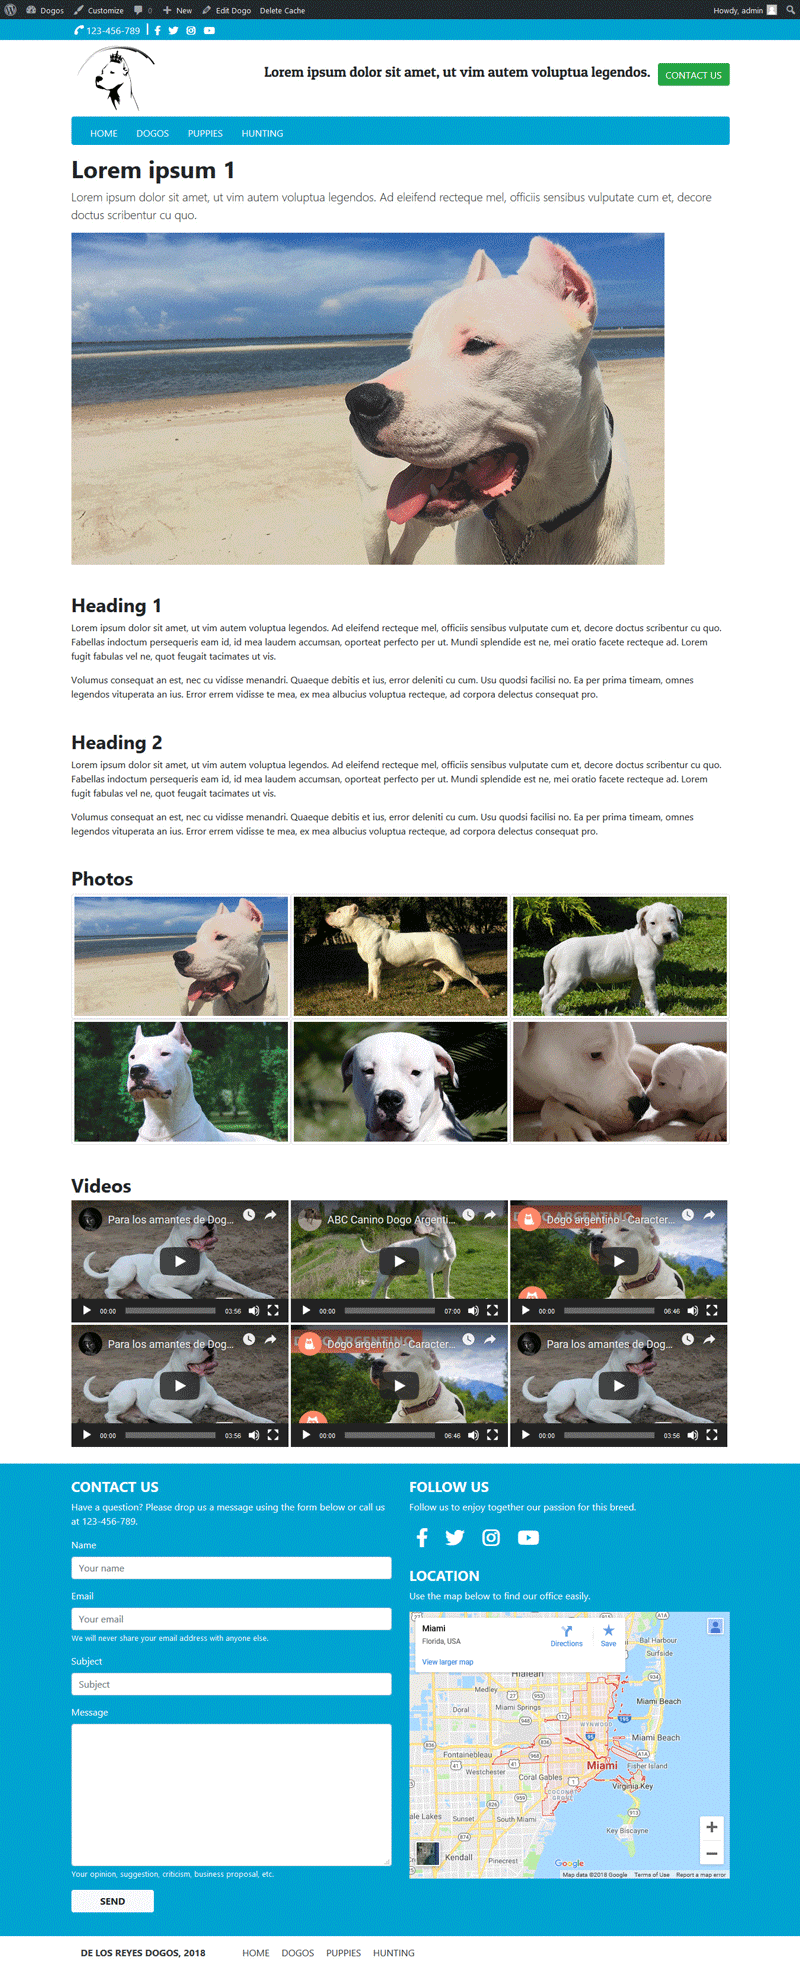 Website "De Los Reyes Dogos": A single page viewed on large-screen devices.